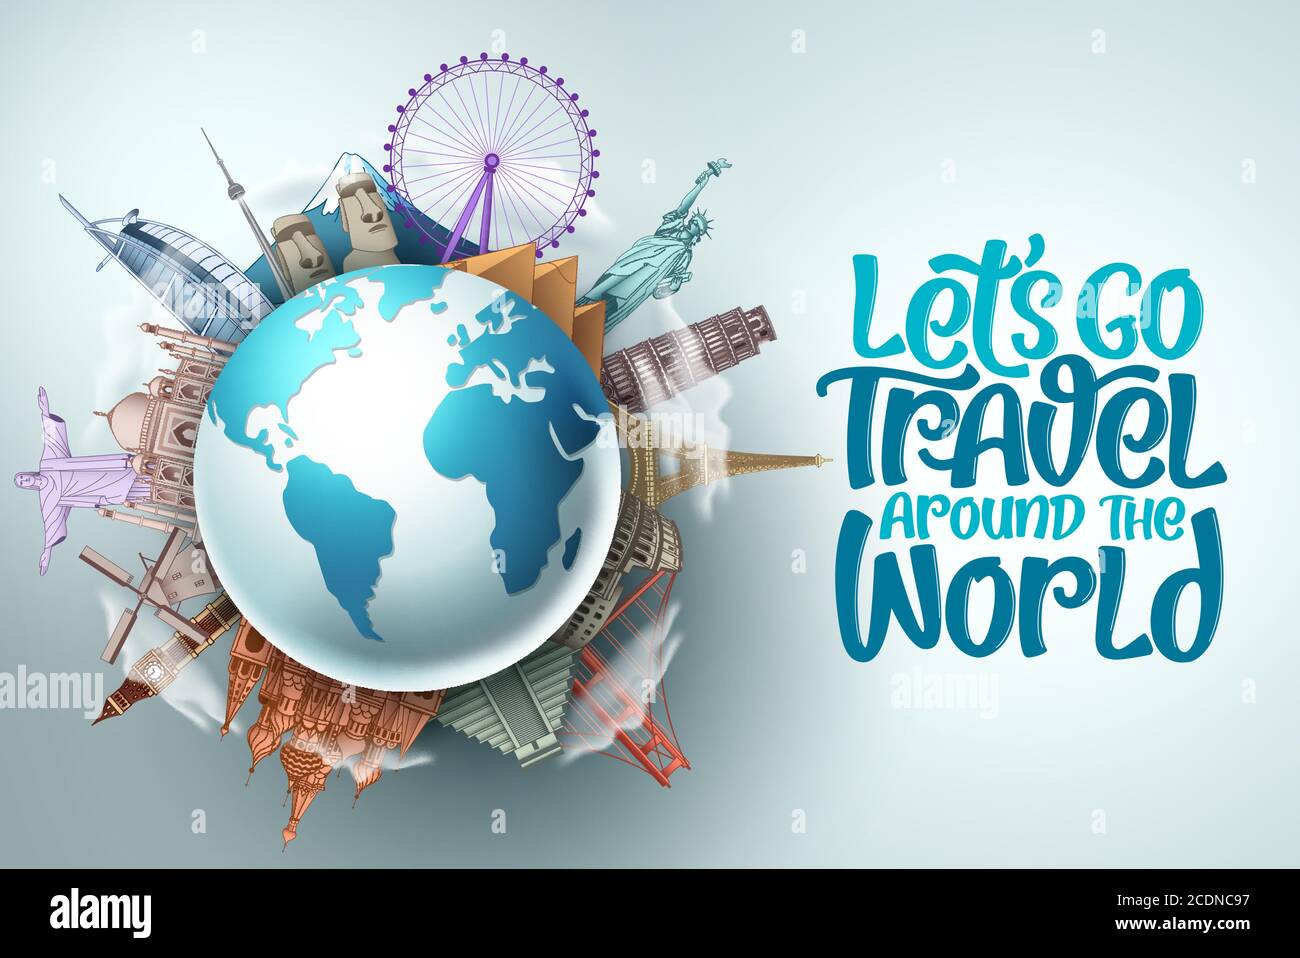 Let's go travel around the world vector design. Travel and tourism with ...